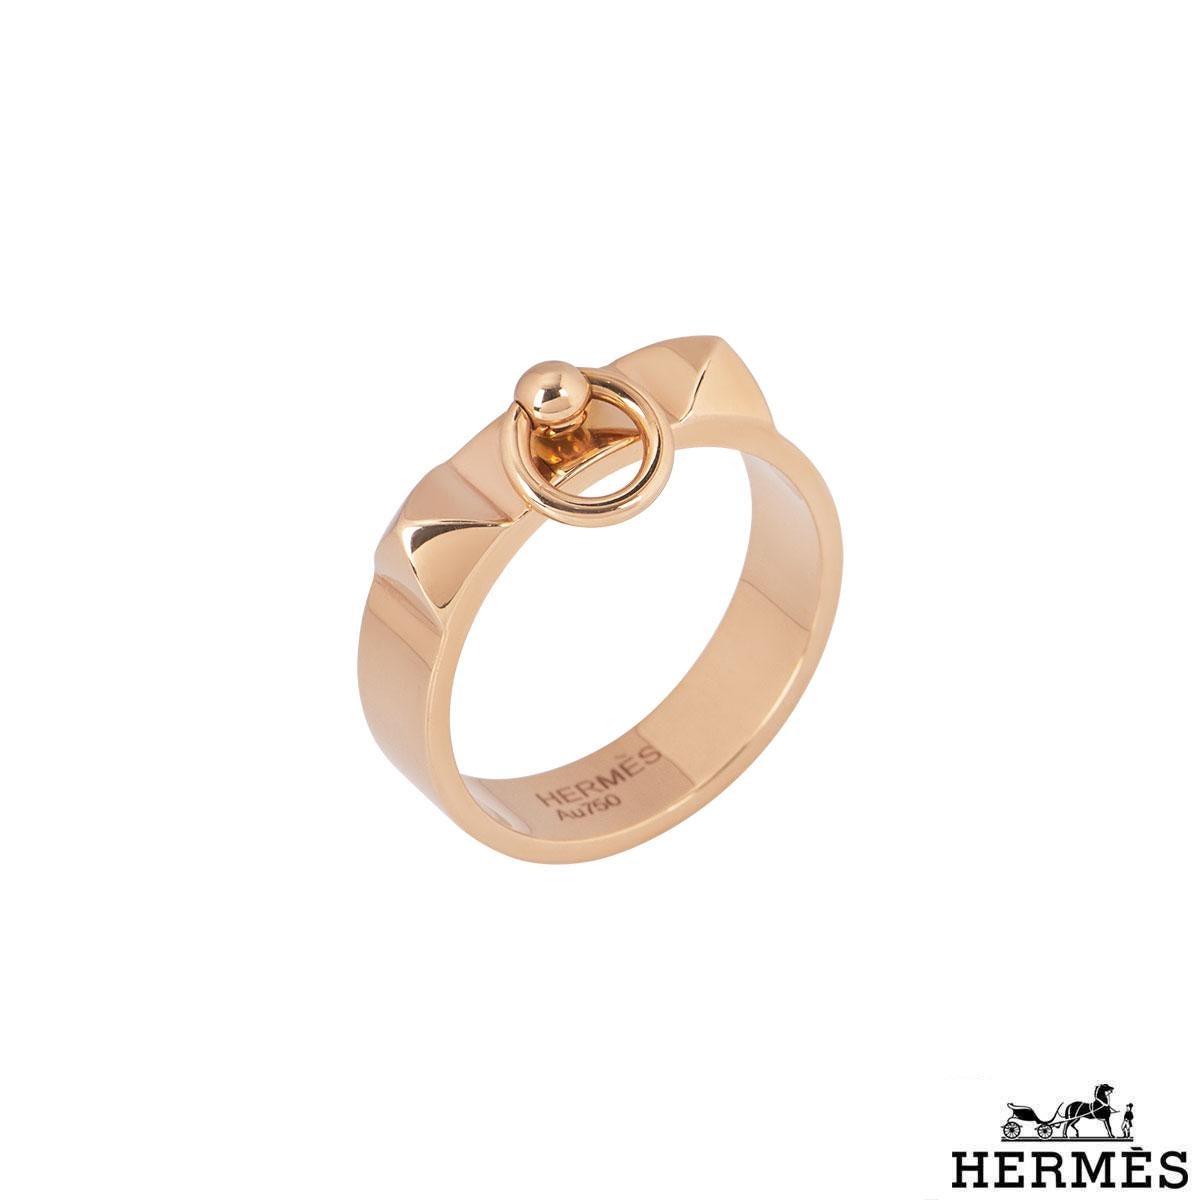 An 18k rose gold ring by Hermes from the Collier De Chien collection. The ring features the iconic buckle design with triangle shaped motifs on each side. The ring is a size UK N½/US 6.75/EU 54 with a gross weight of 6.40 grams.

The bracelet comes